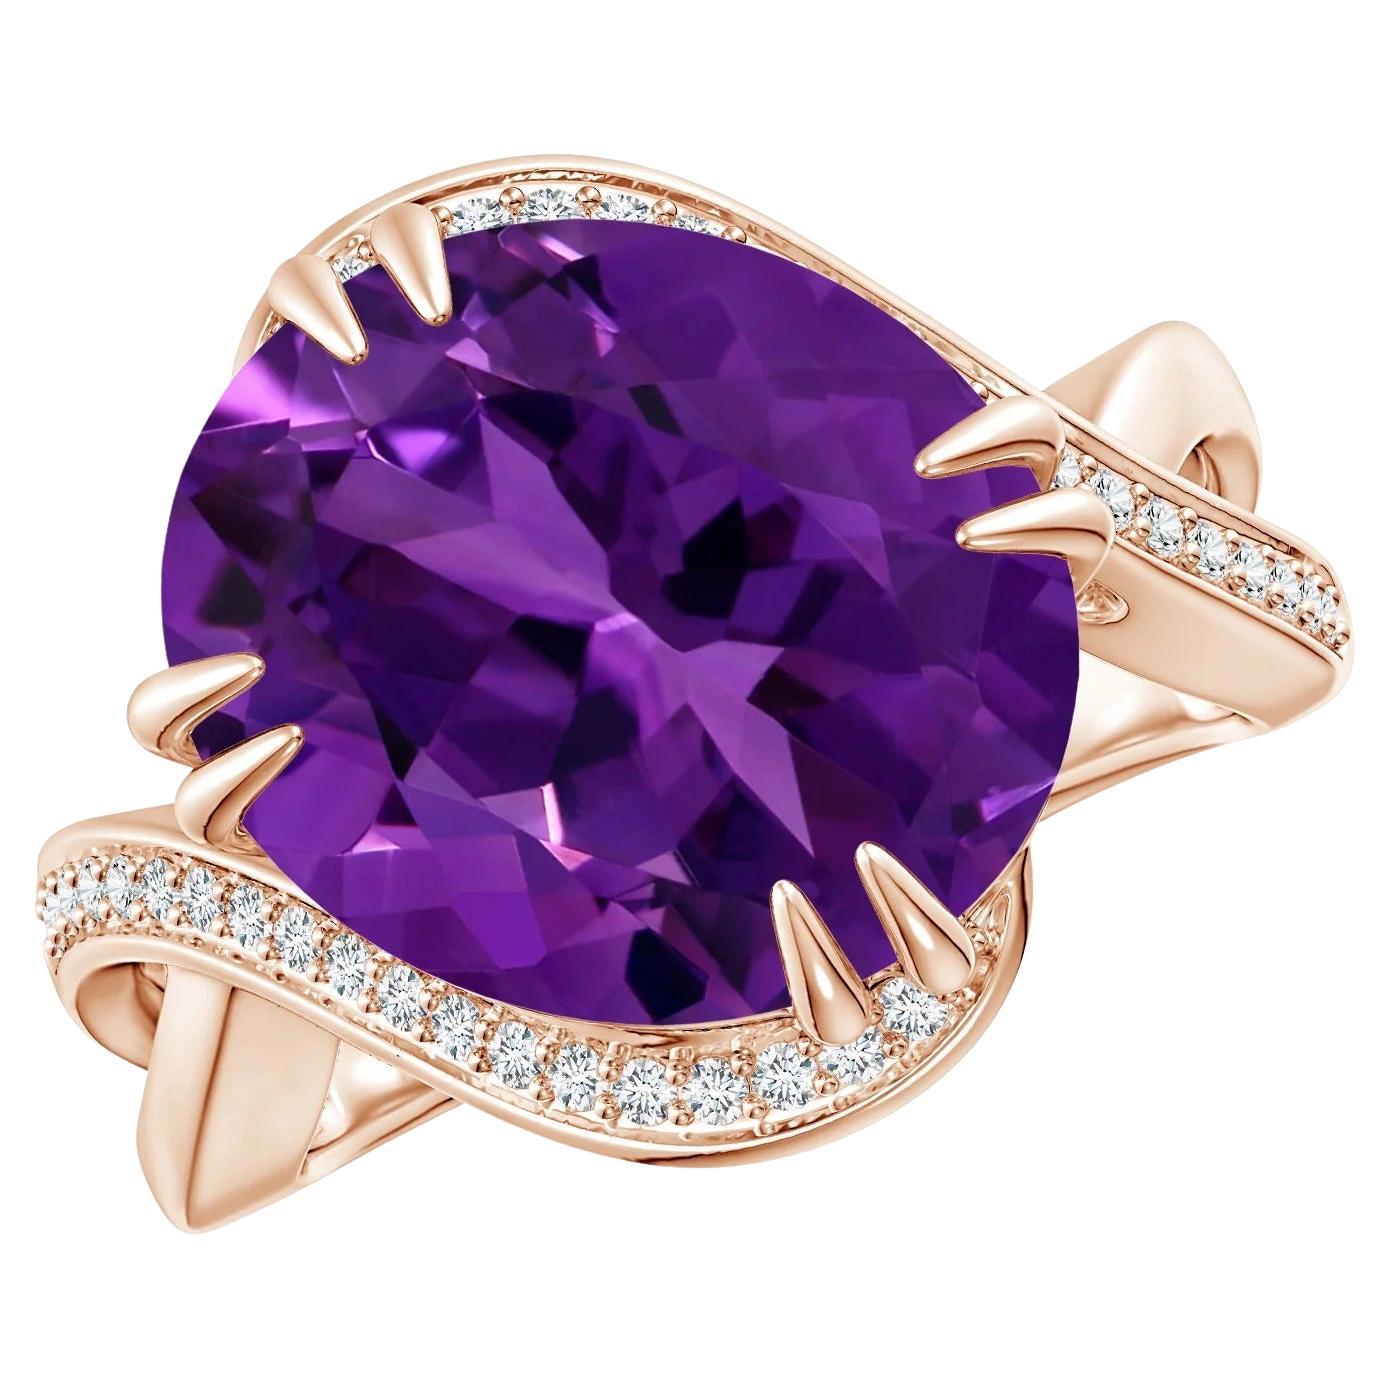 For Sale:  Angara GIA Certified Natural Amethyst Bypass Rose Gold Ring with Diamond Accents